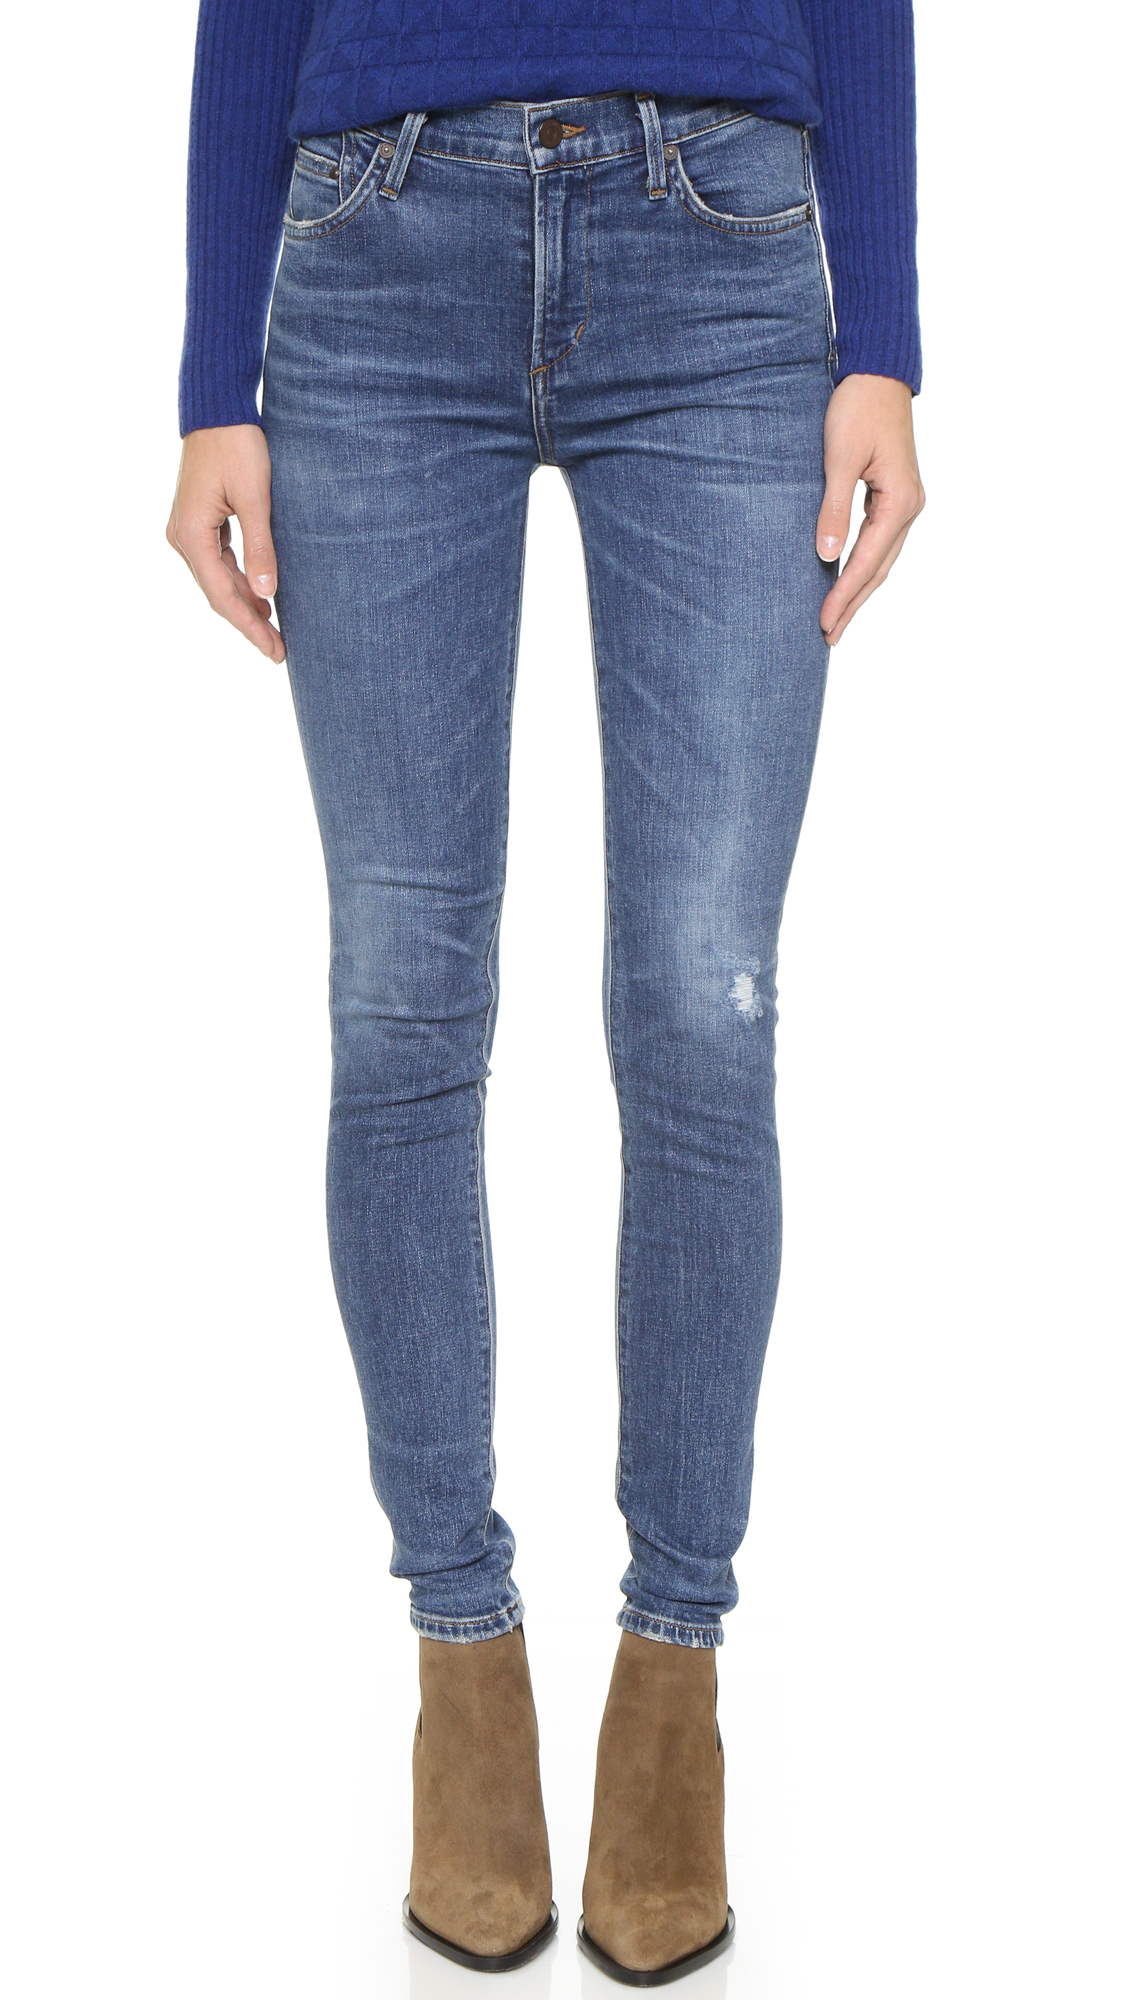 Lyst - Citizens of humanity Rocket High Rise Skinny Jeans in Blue